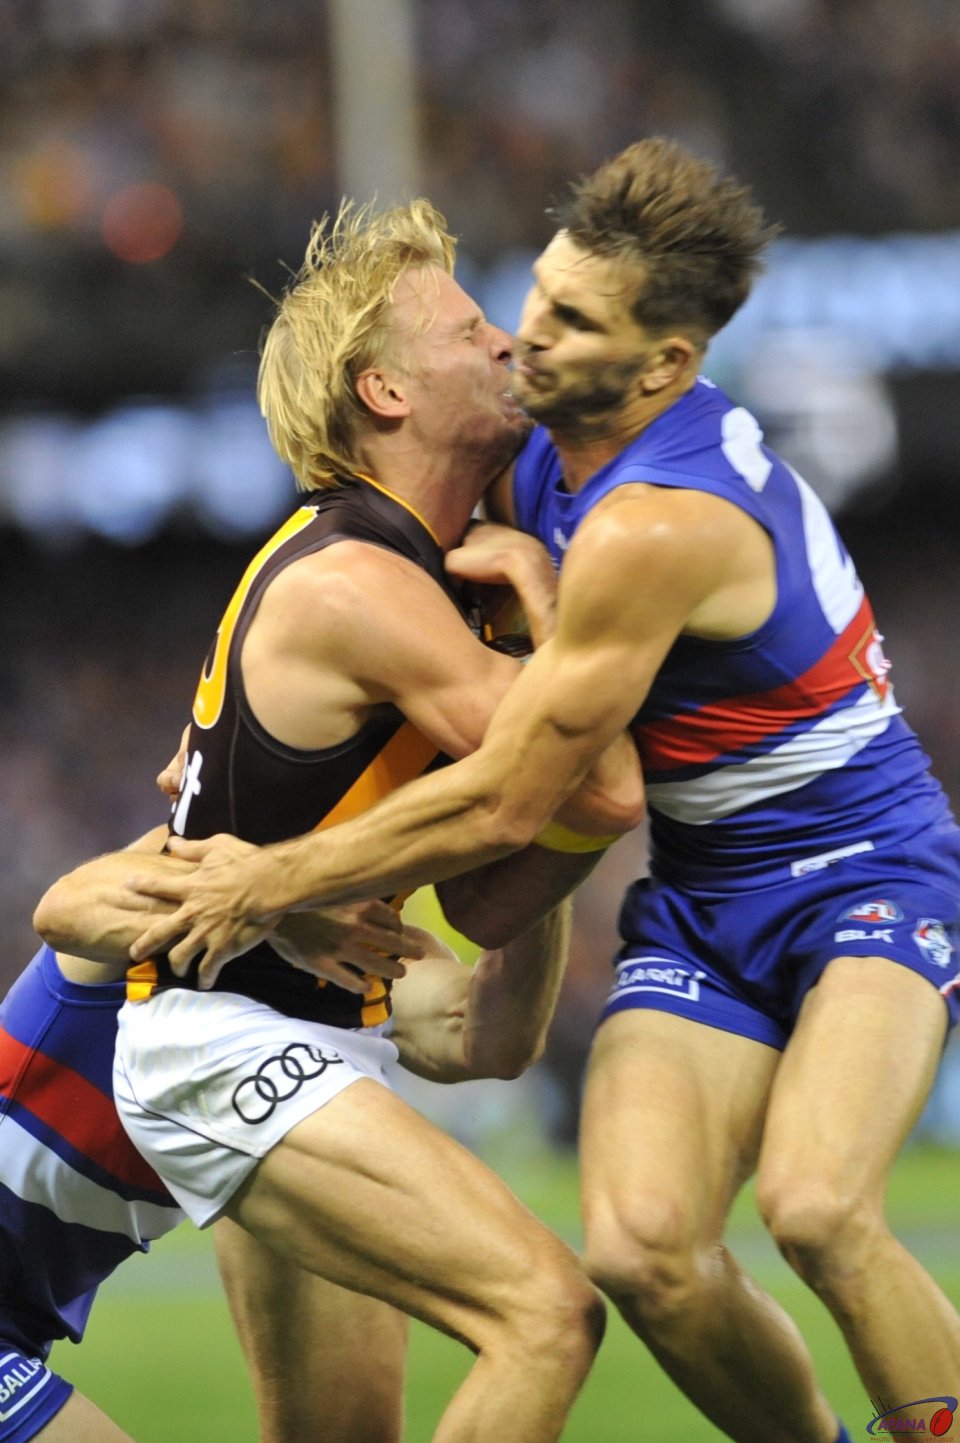 Wil Langford and Koby Stevens clash